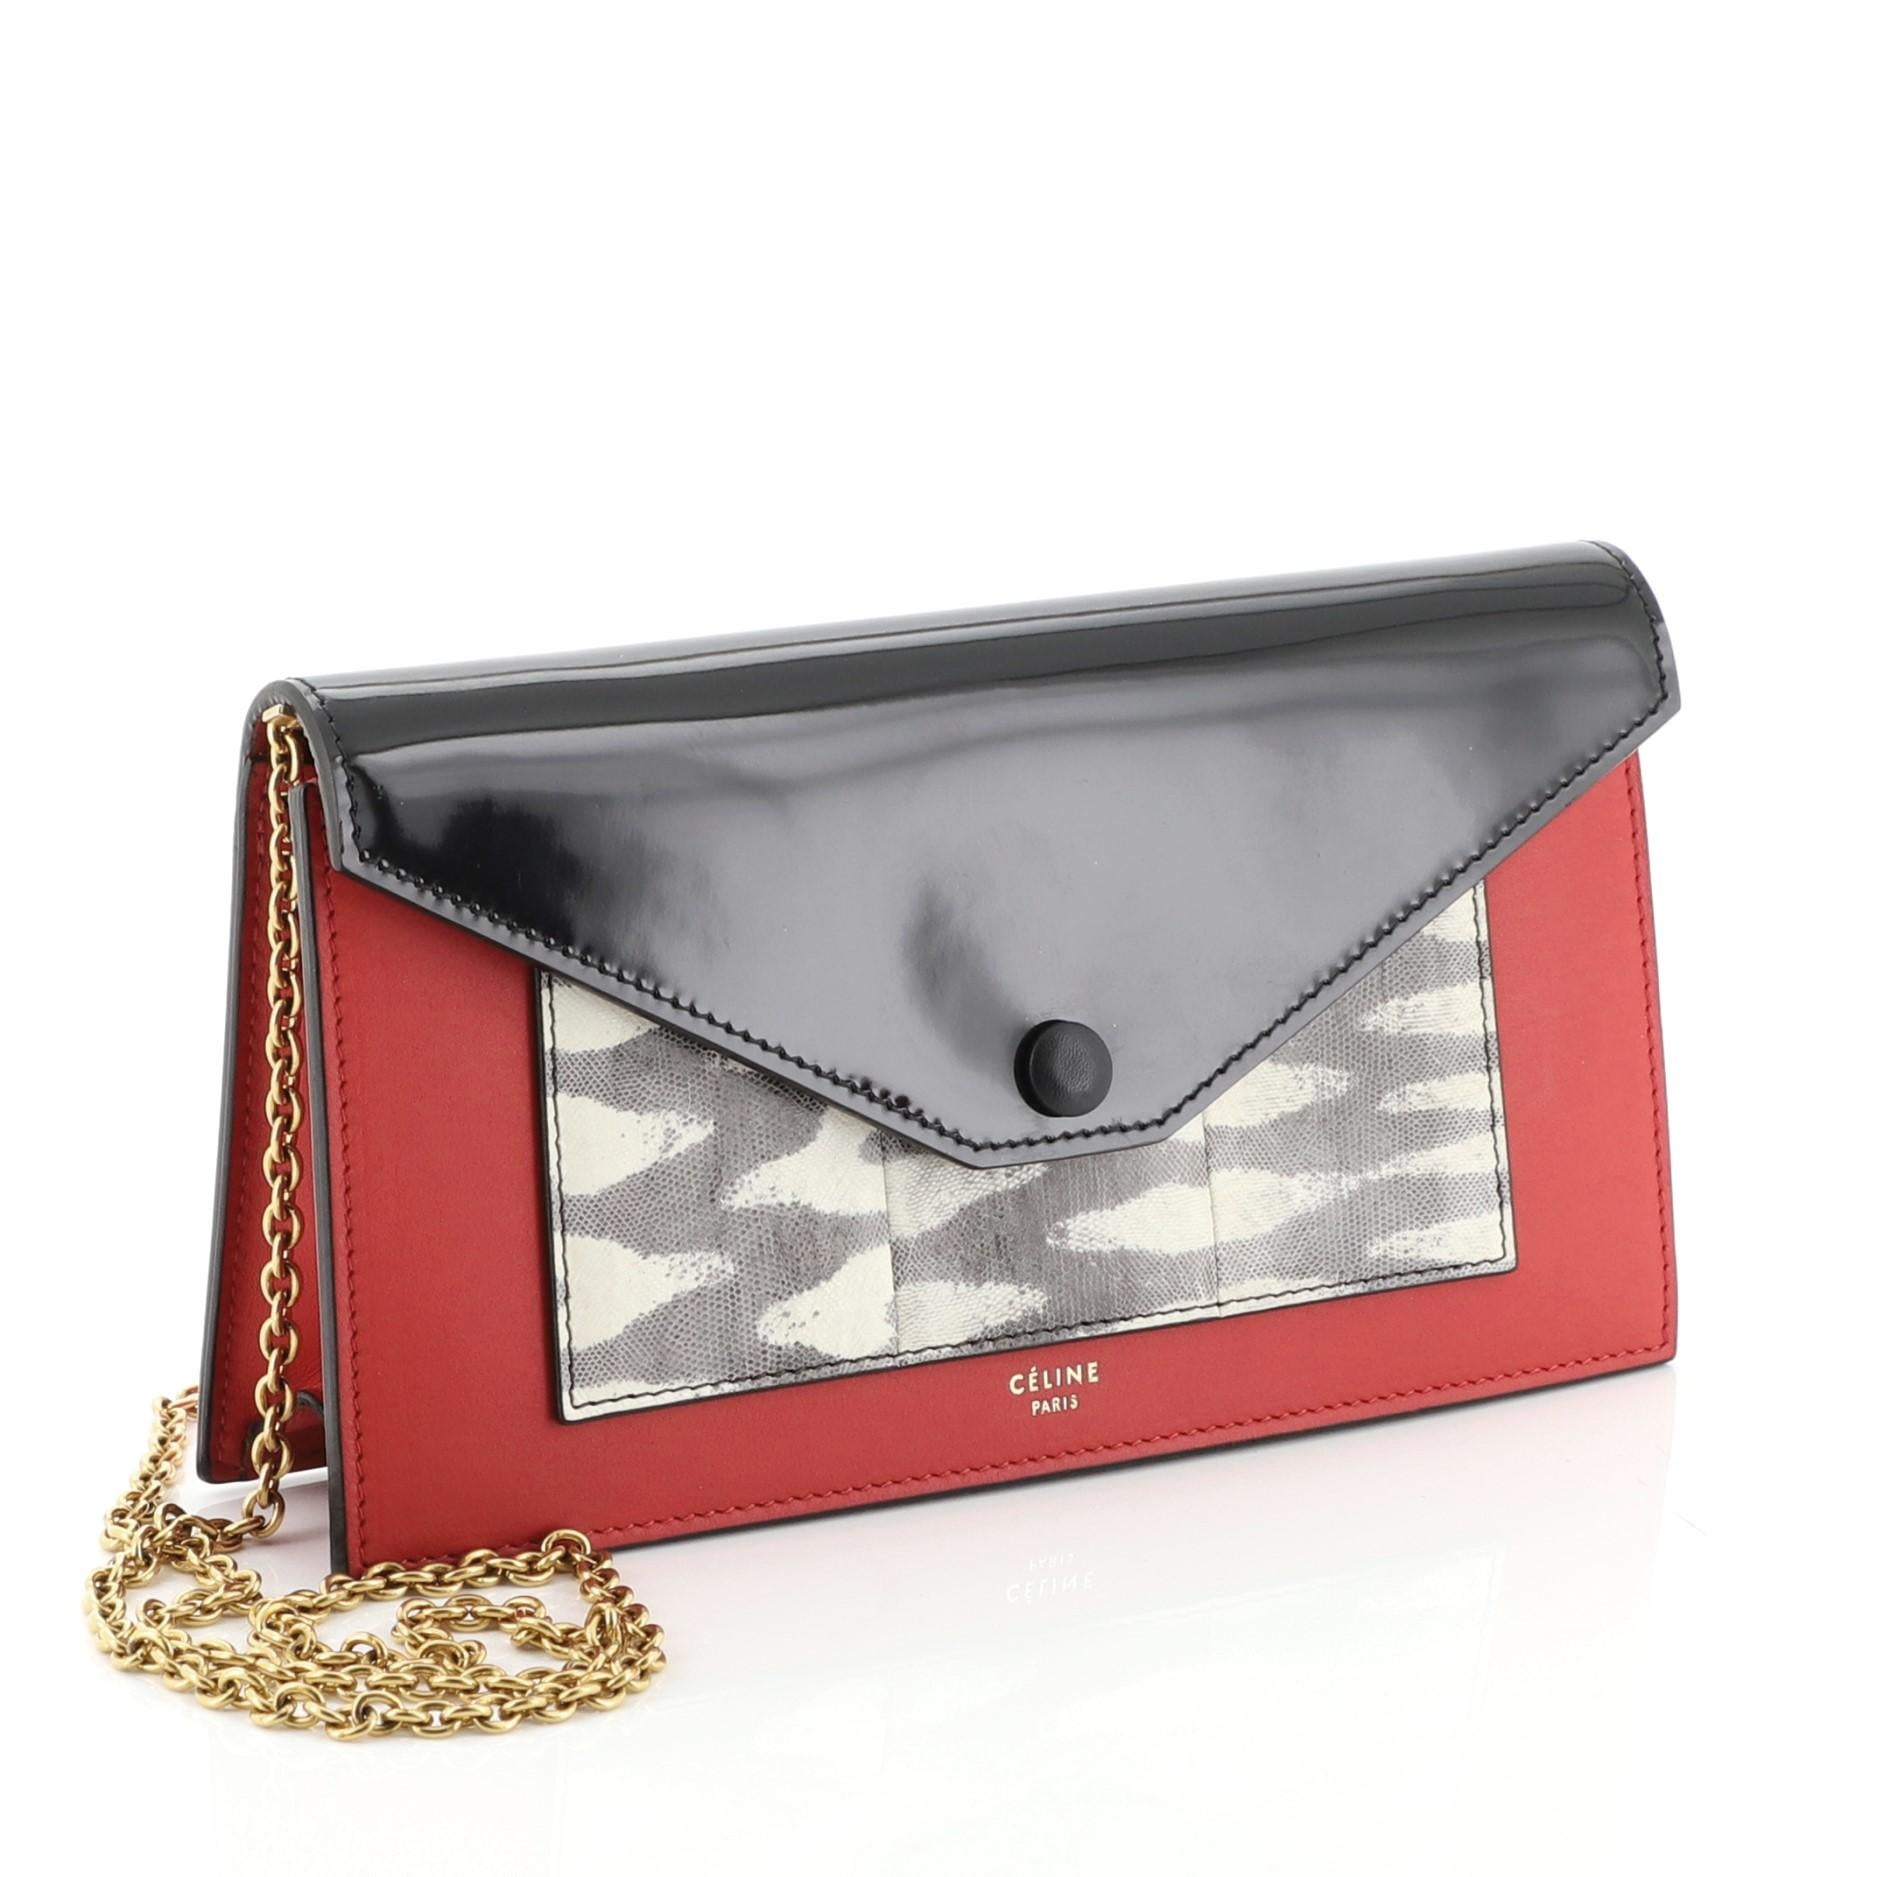 This Celine Pocket Envelope Wallet on Chain Leather and Lizard Small, crafted from red leather and genuine lizard , features gold chain-link strap, envelope flap, Celine stamped logo, and gold-tone hardware. Its snap button closure opens to a red